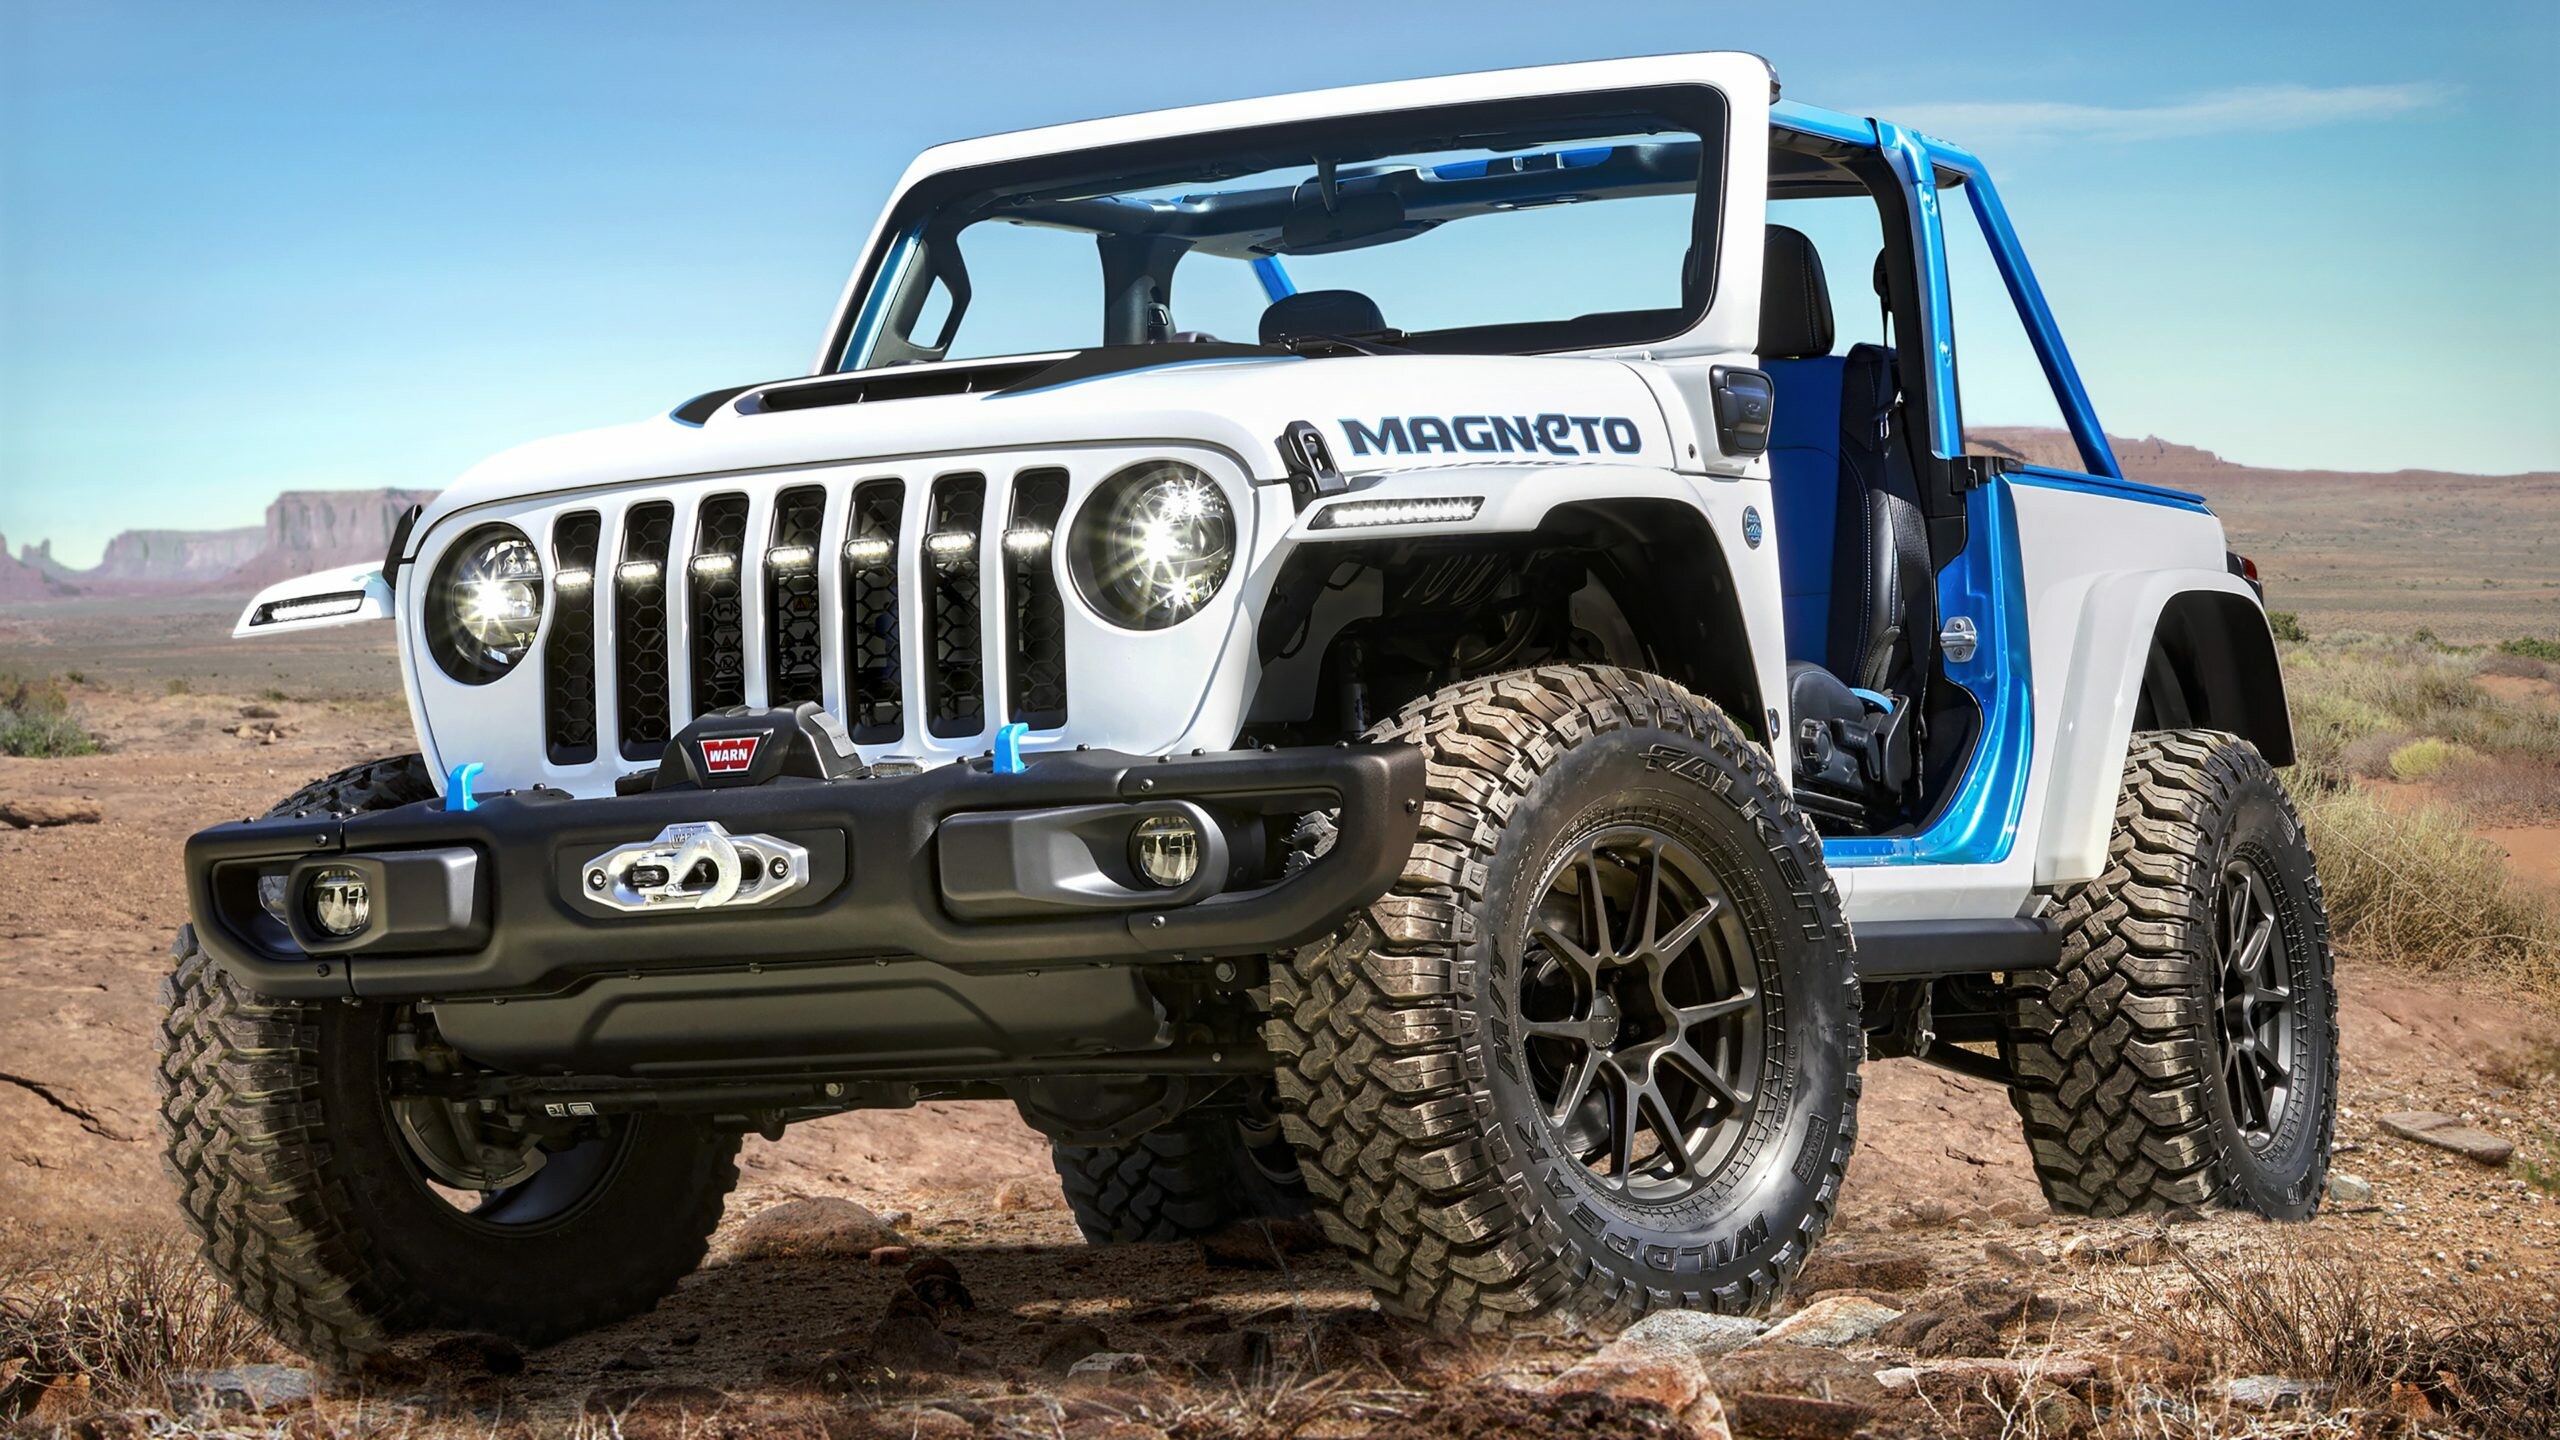 Jeep: Wrangler Magneto SUV concept, which combines an electric powertrain with a manual transmission, 2021. 2560x1440 HD Background.